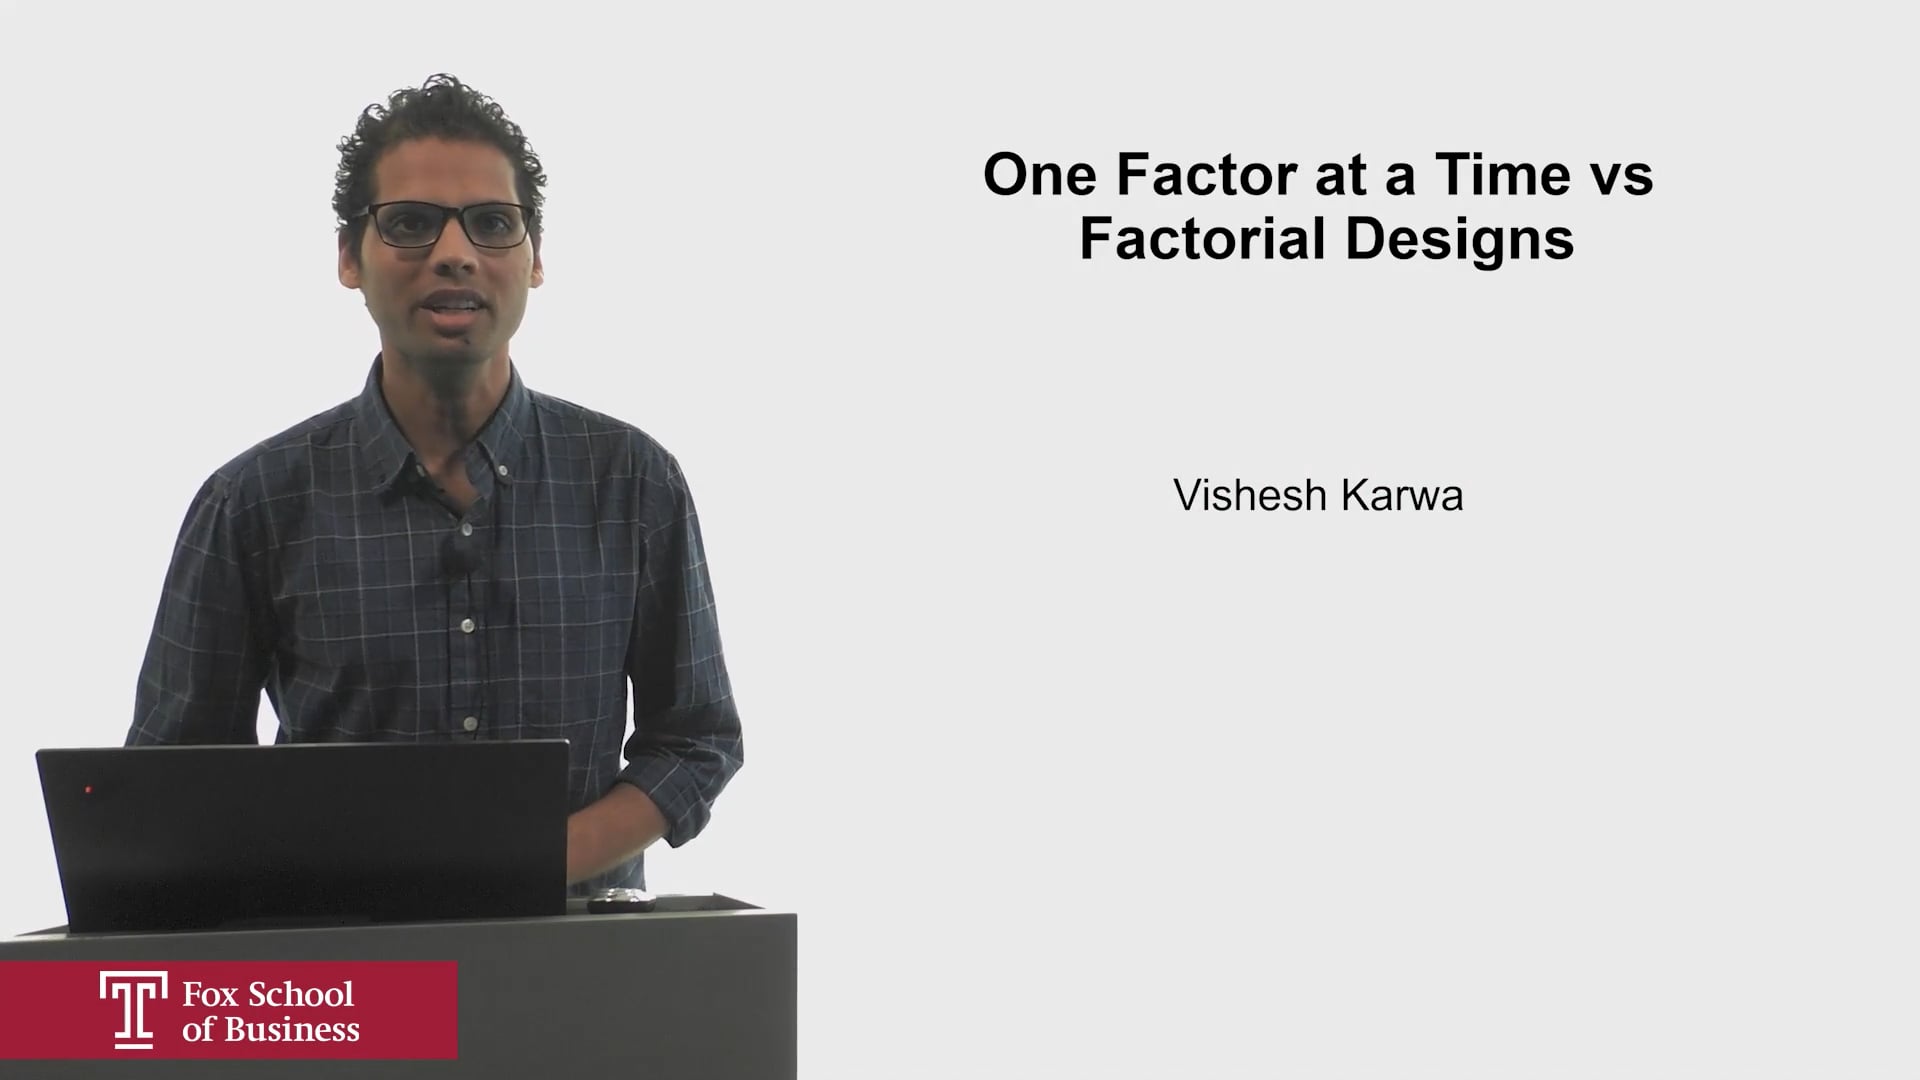 One Factor at a Time vs Factorial Designs